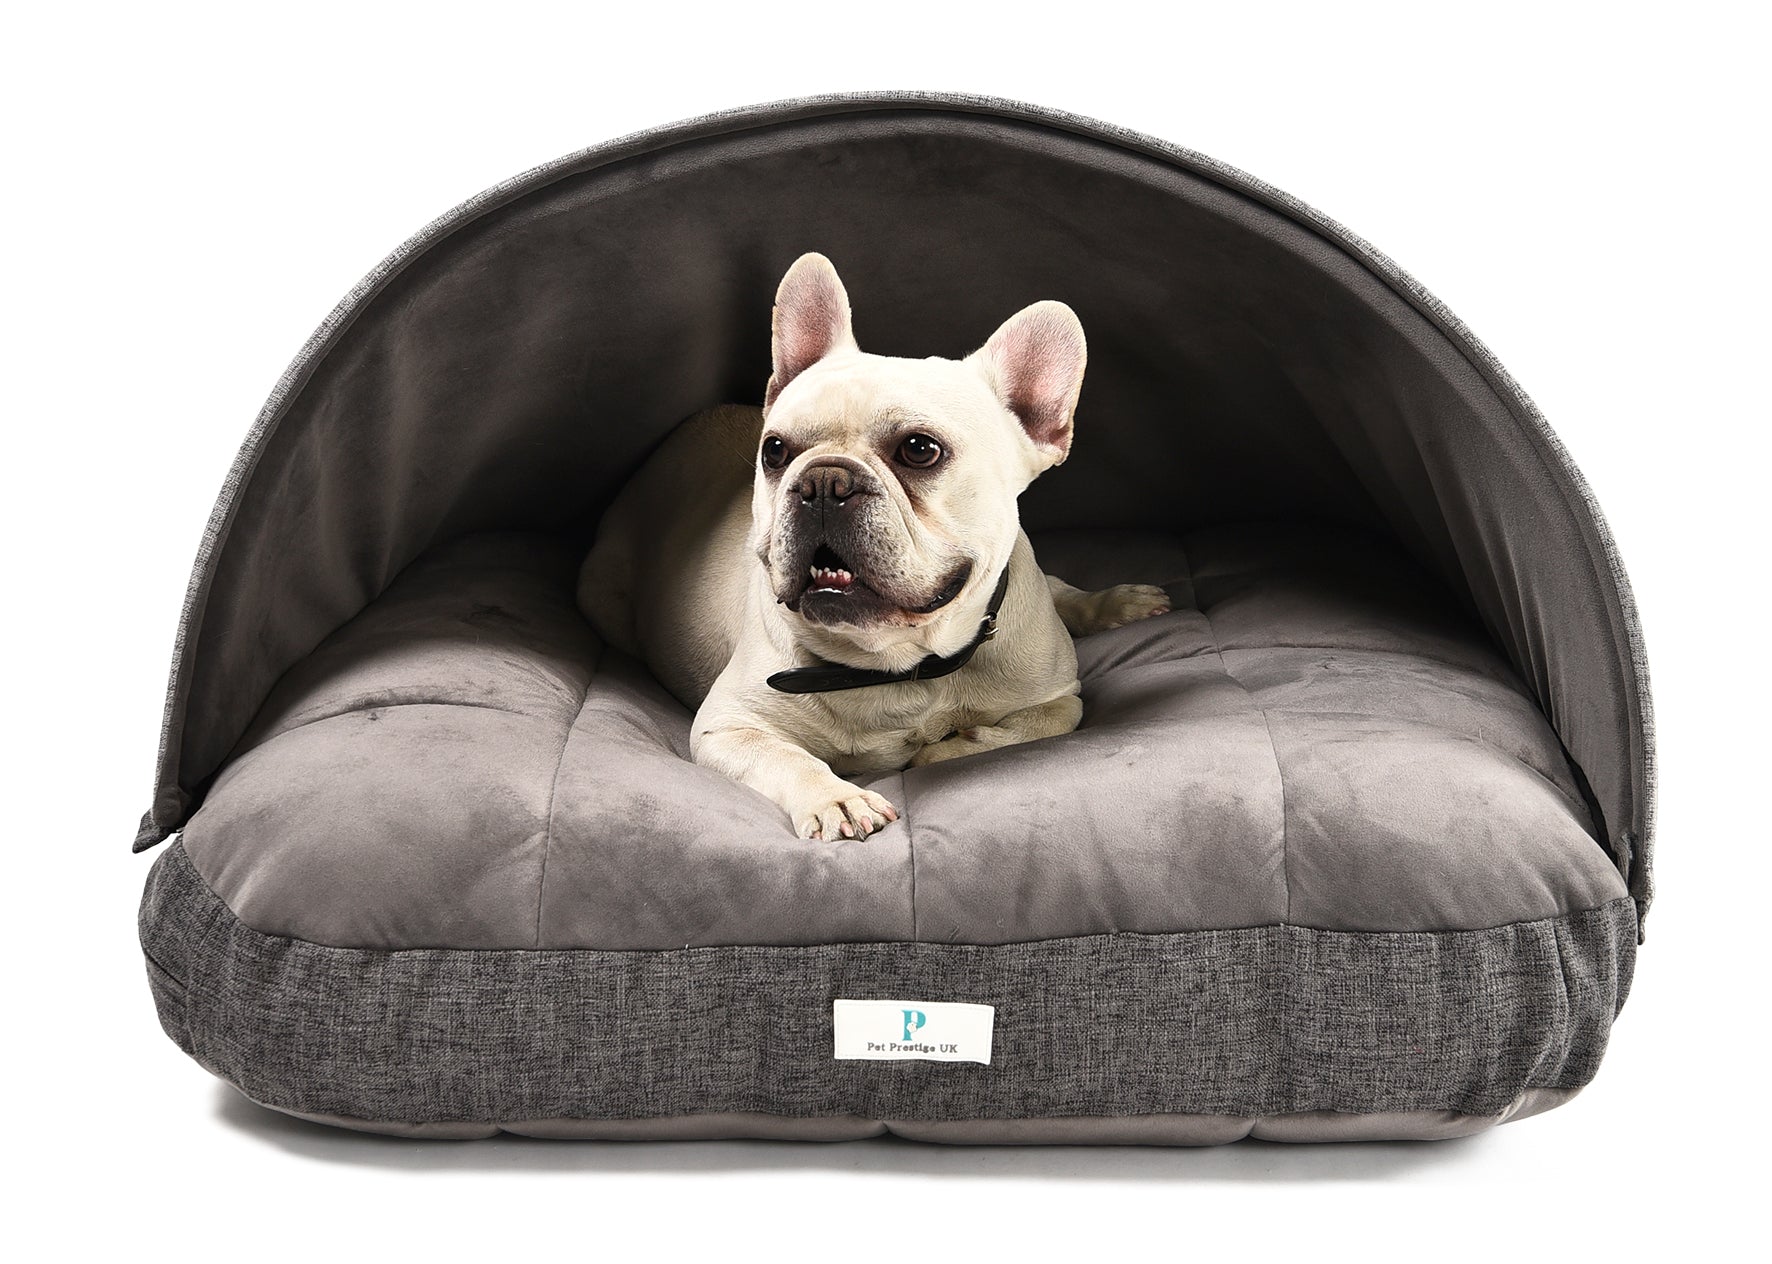 The Hideaway Cushion Luxury Dog Bed